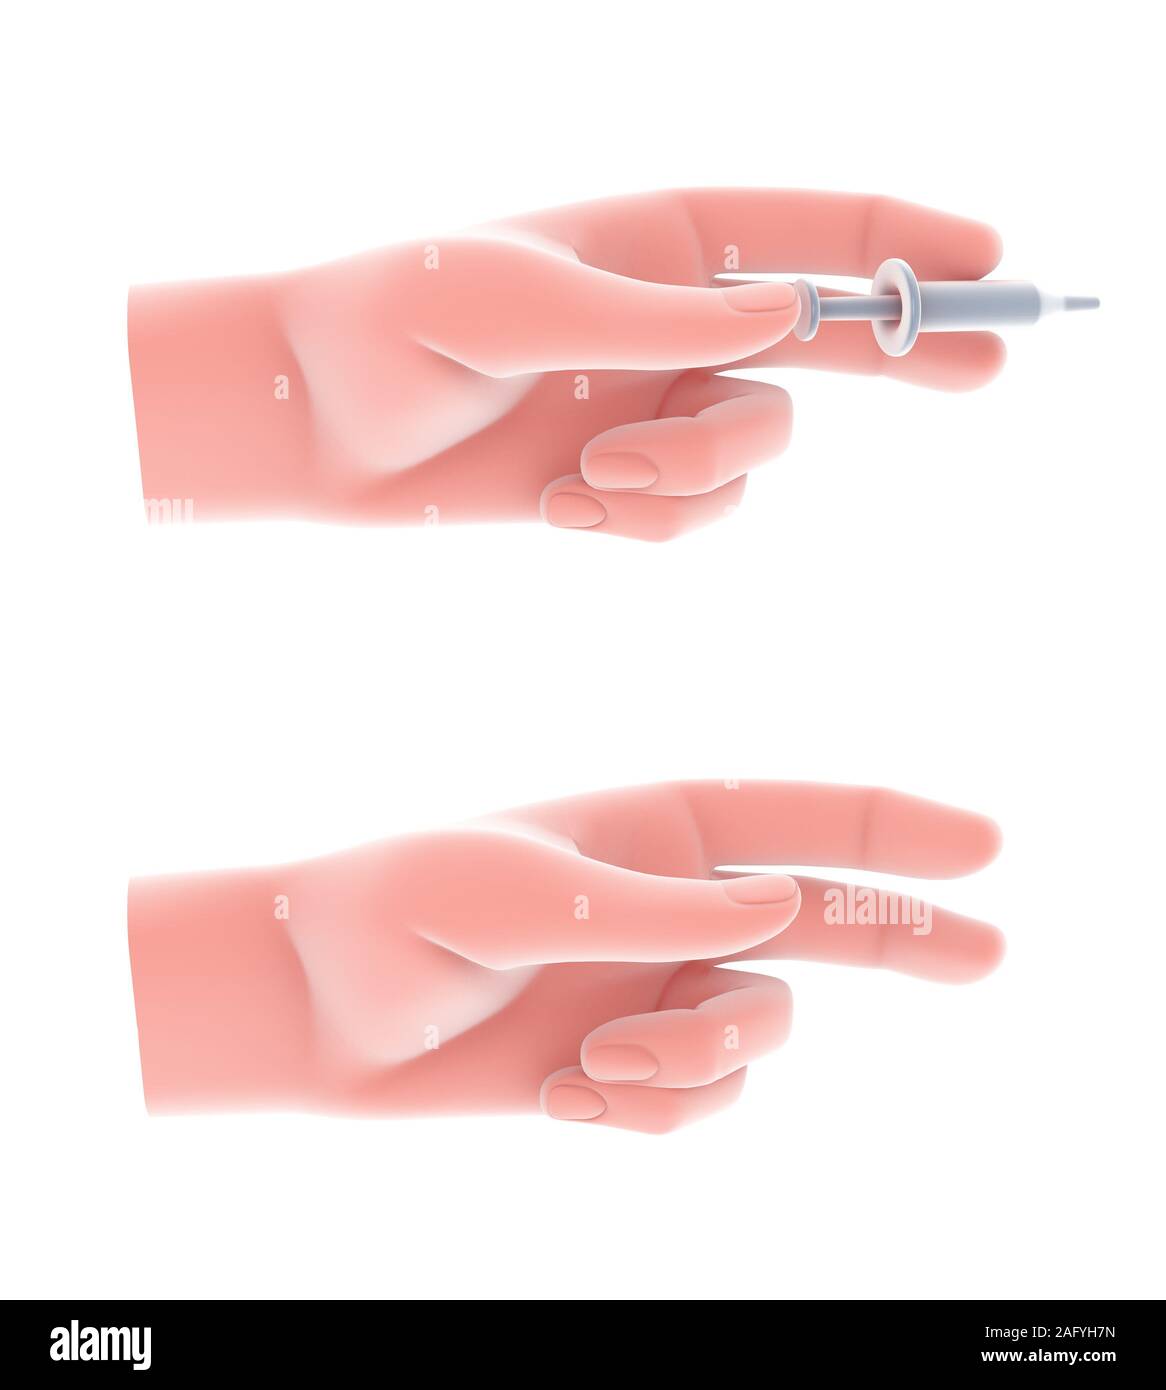 3d illustration of hand with the posture of the action of using a syringe. Image isolated on white background, with striking colors. Stock Photo